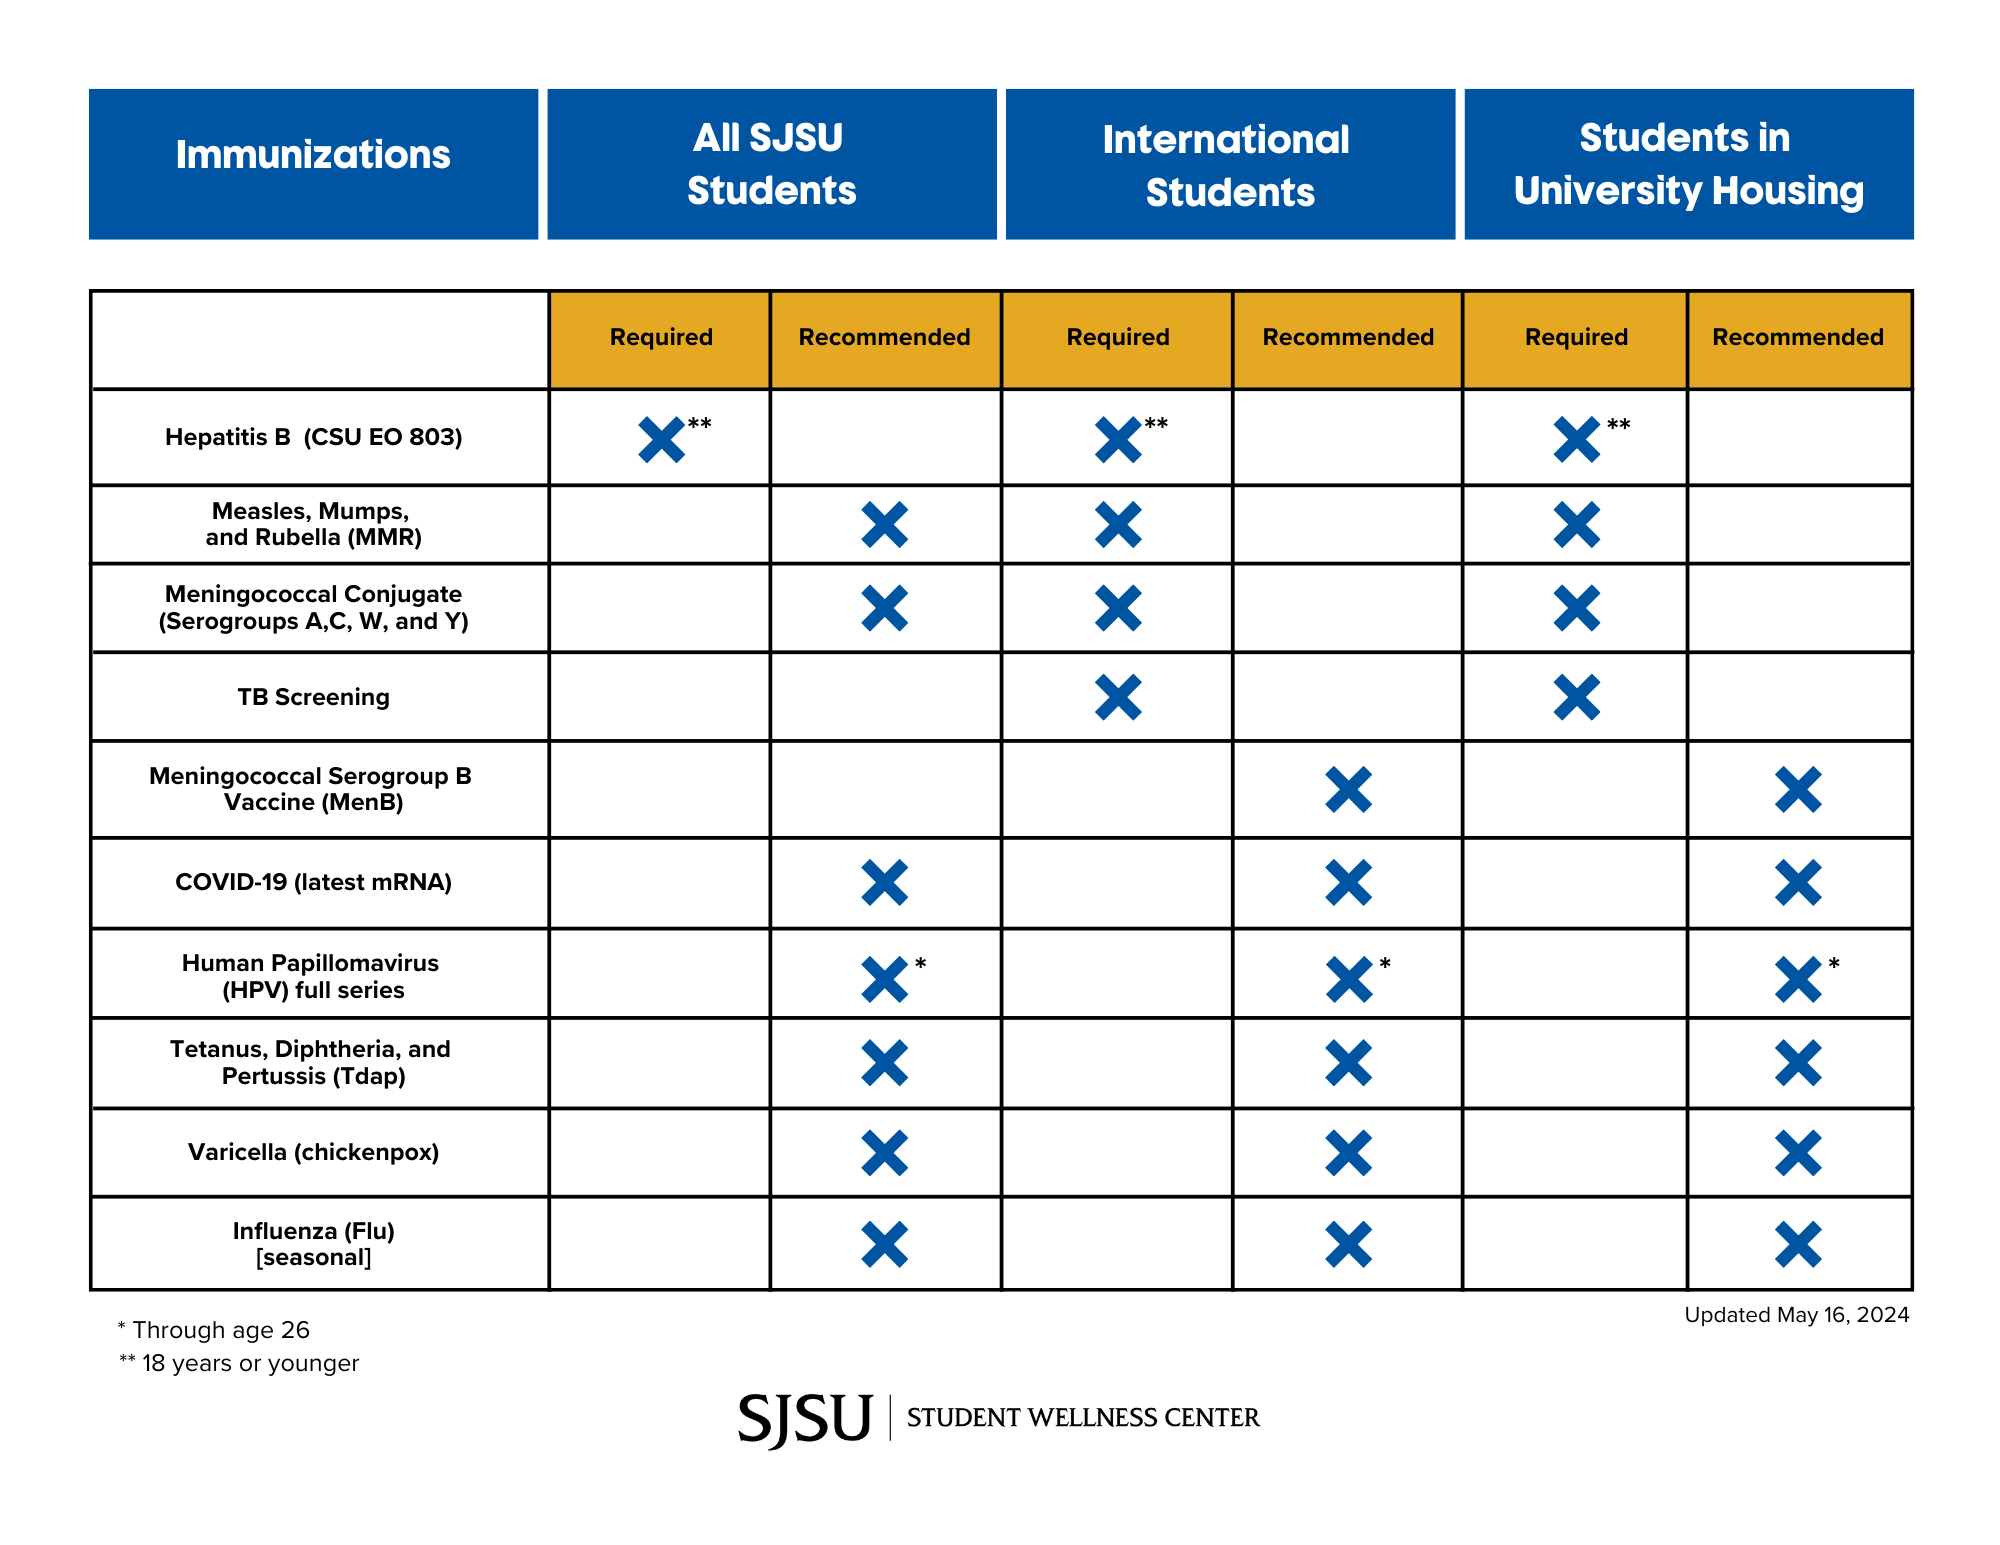 immunizations chart with required and recommended immunizations for SJSU students